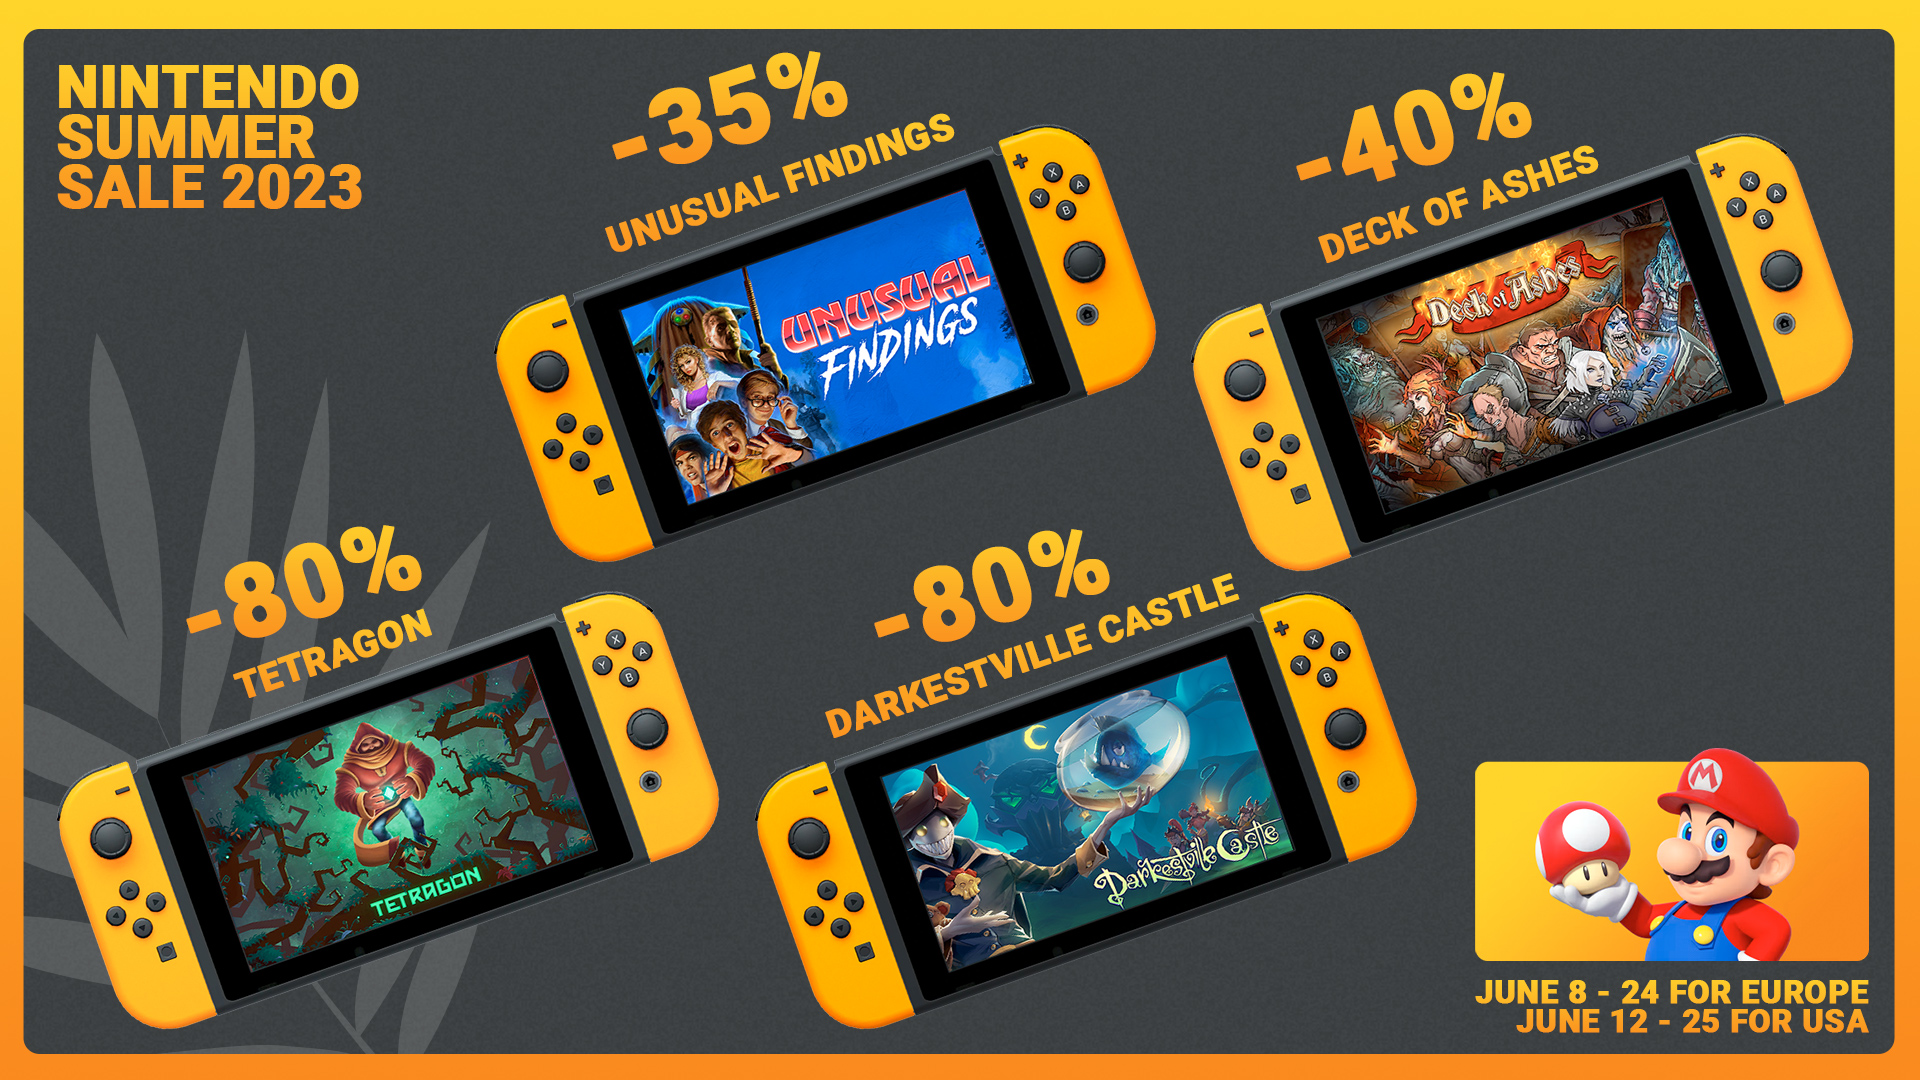 Our Games Featured in Nintendo Summer Sale 2023! - ESDigital Games